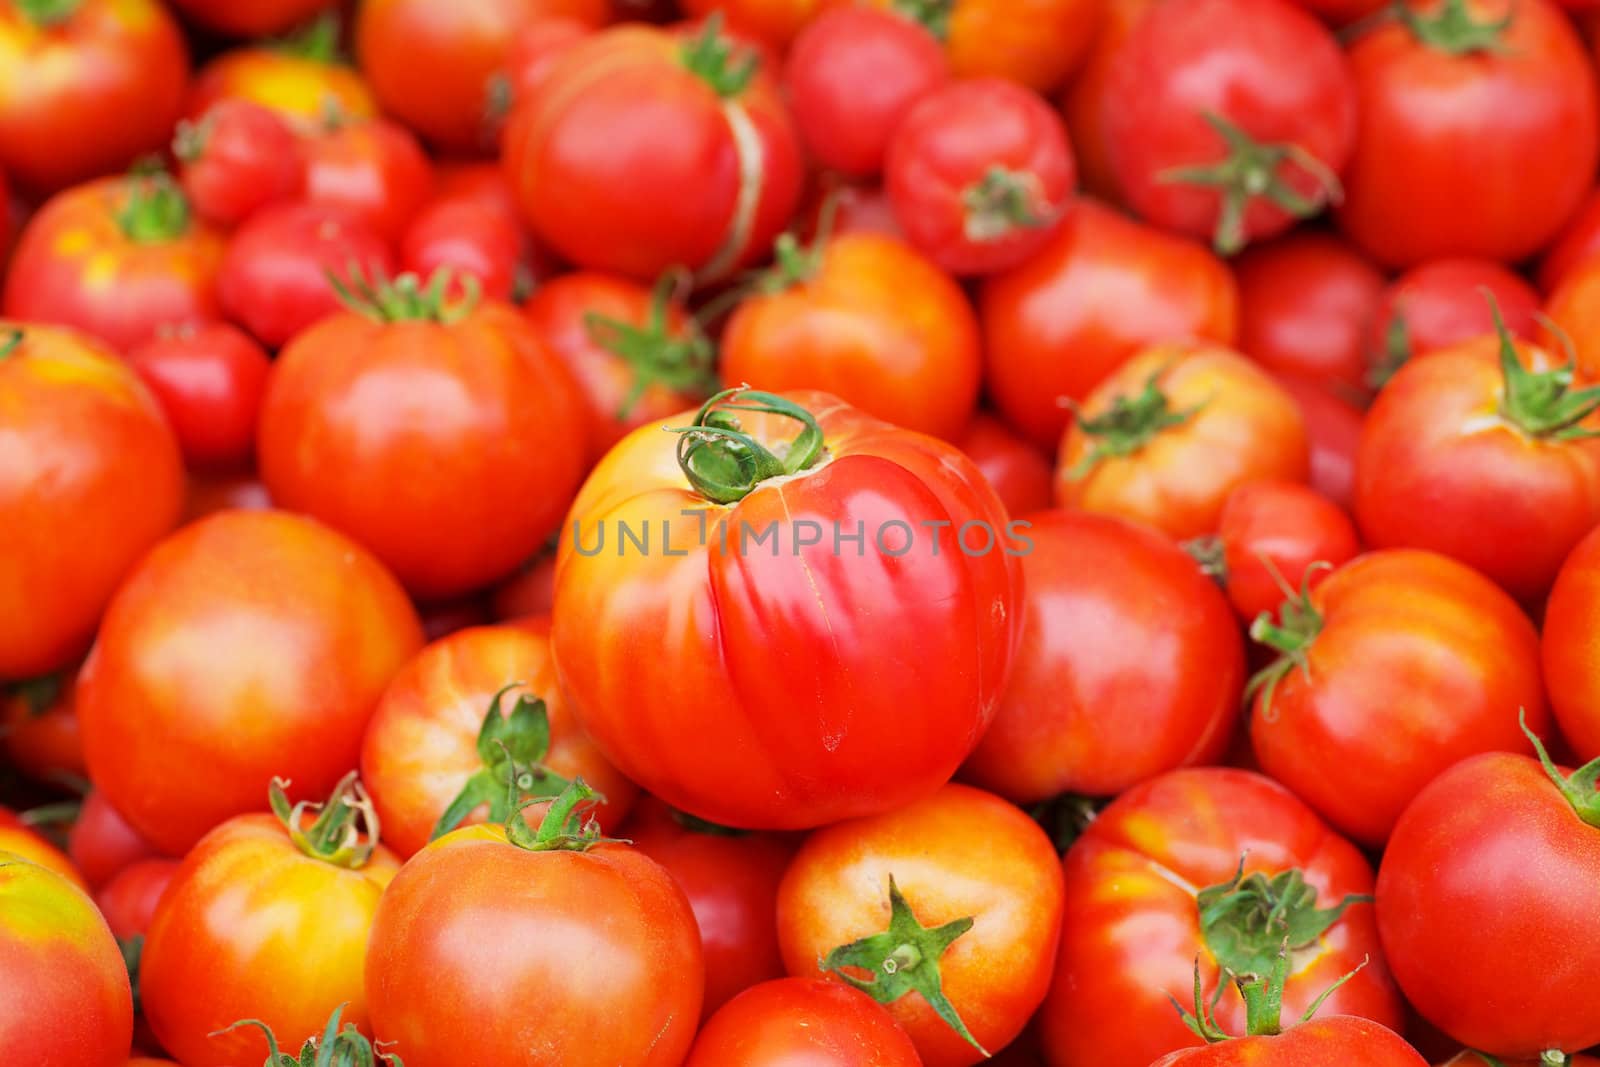 Pile of Red Juicy Tomatoes, one in focus, with softer background at the farmers market
